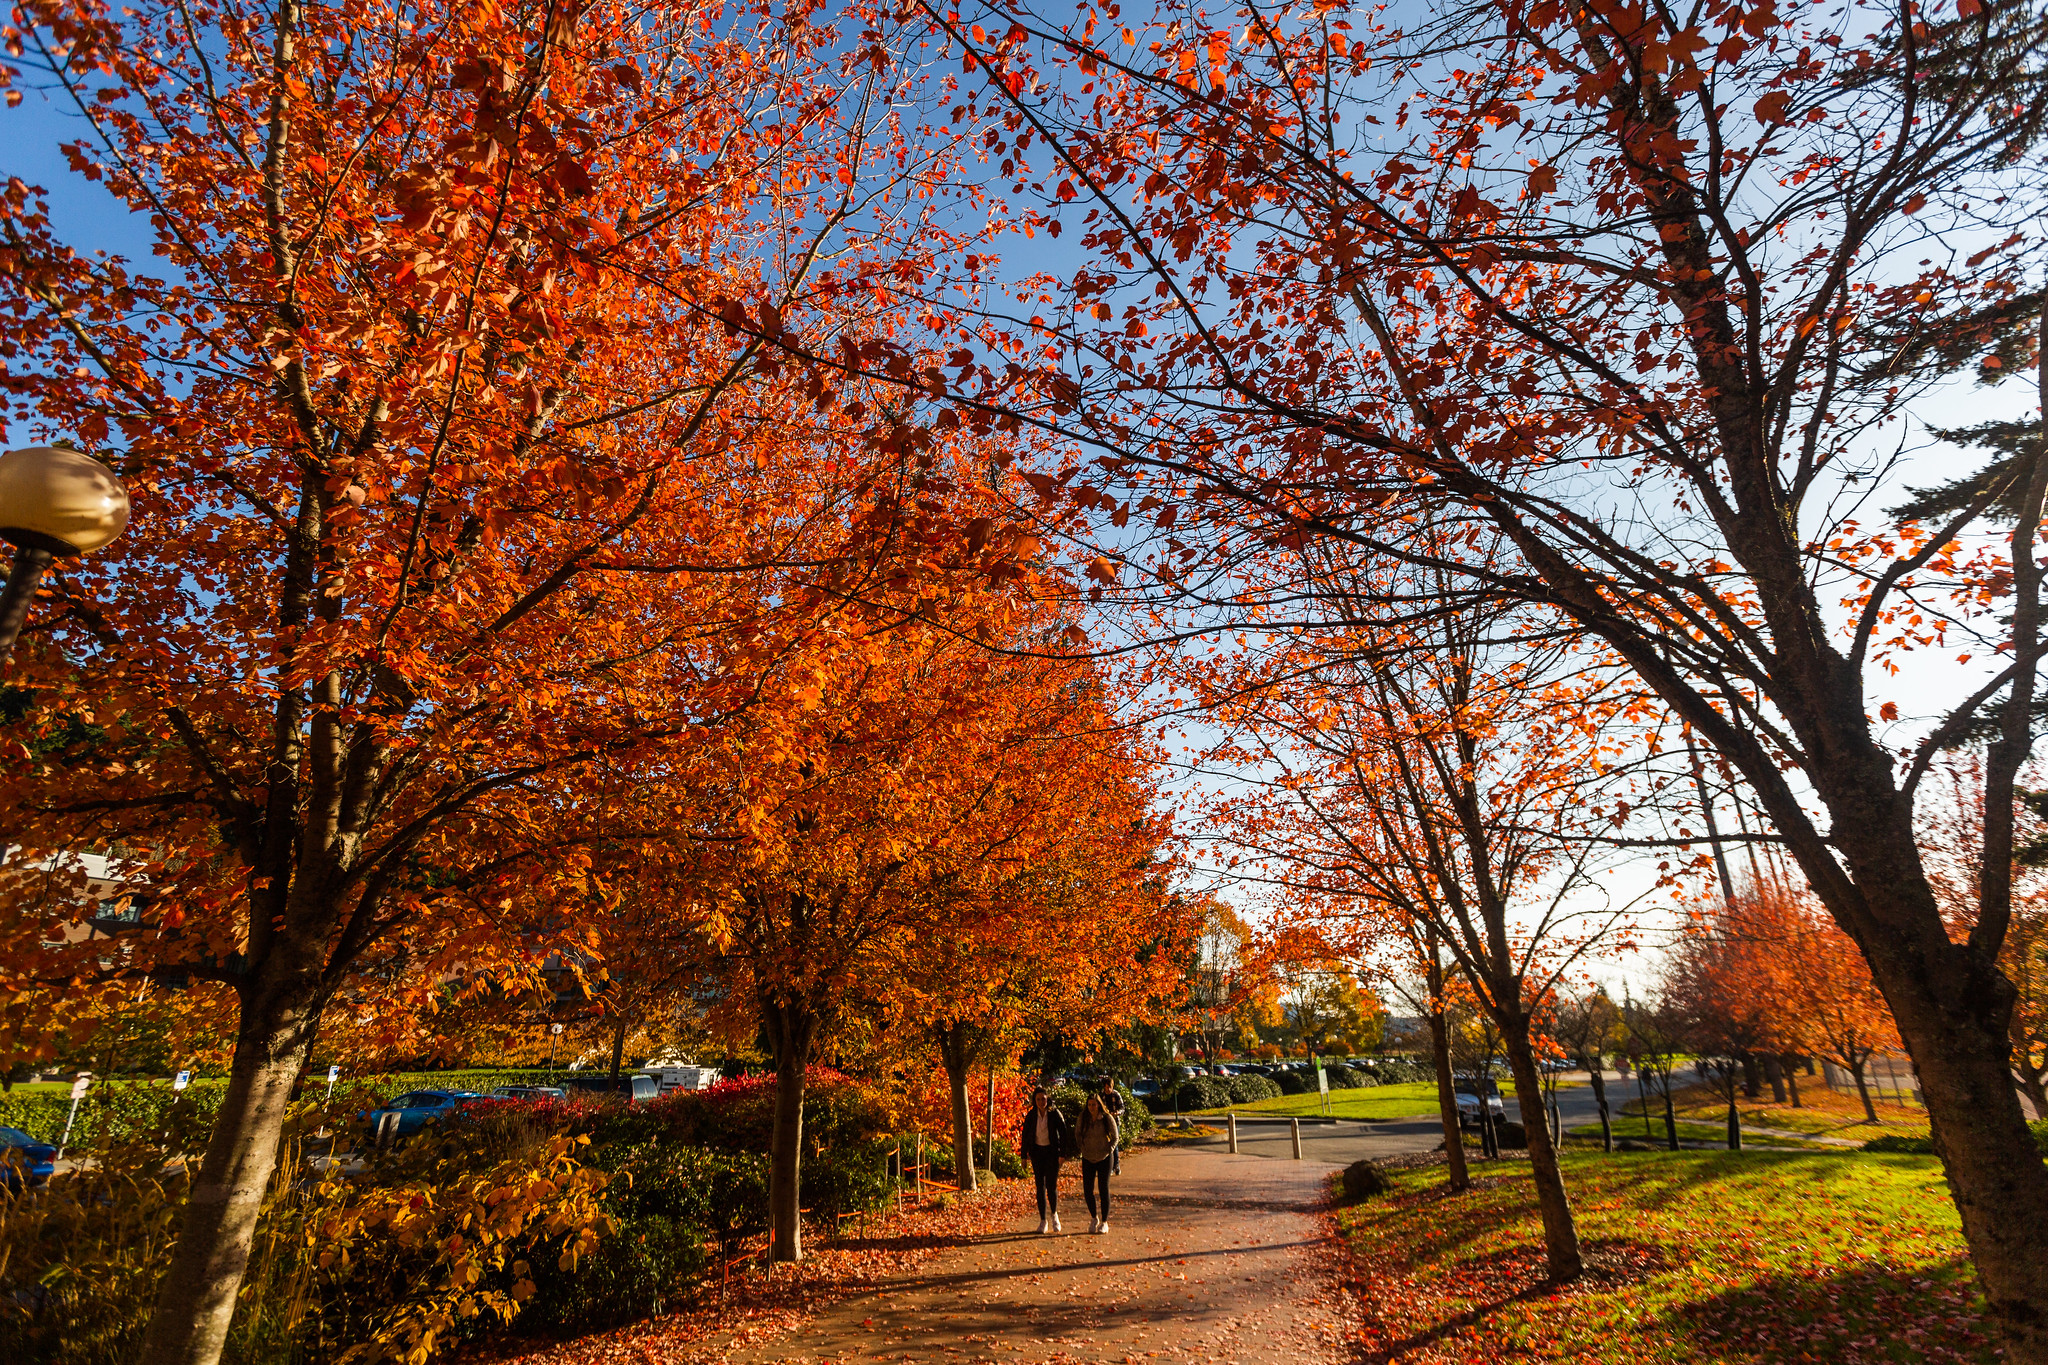 Students walk along a pathway surrounded by colorful trees on south campus